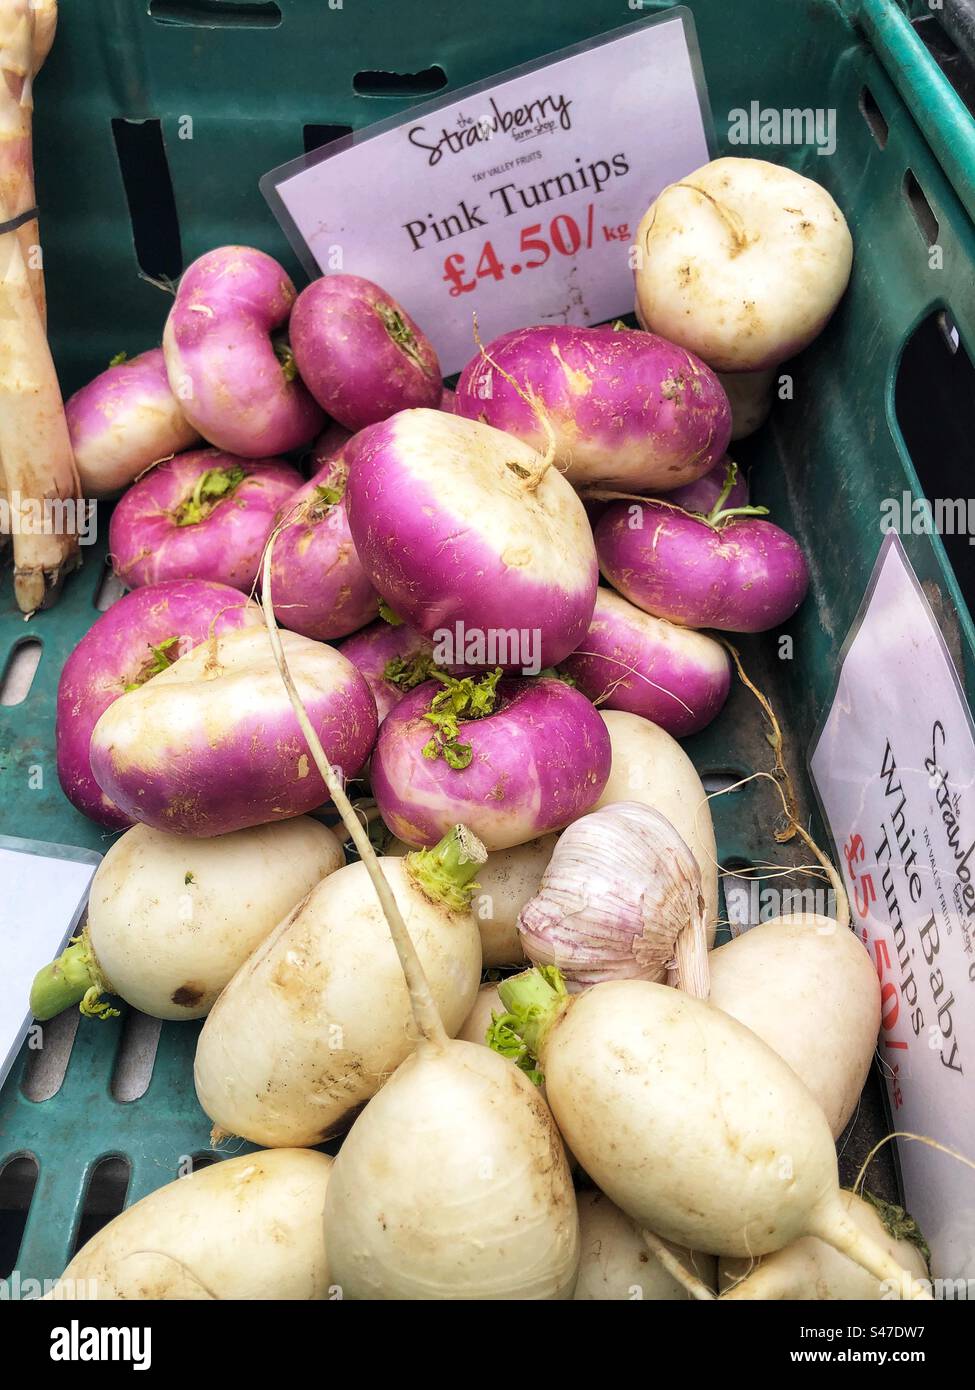 Pink and White baby turnips for sale at farmers market Stock Photo